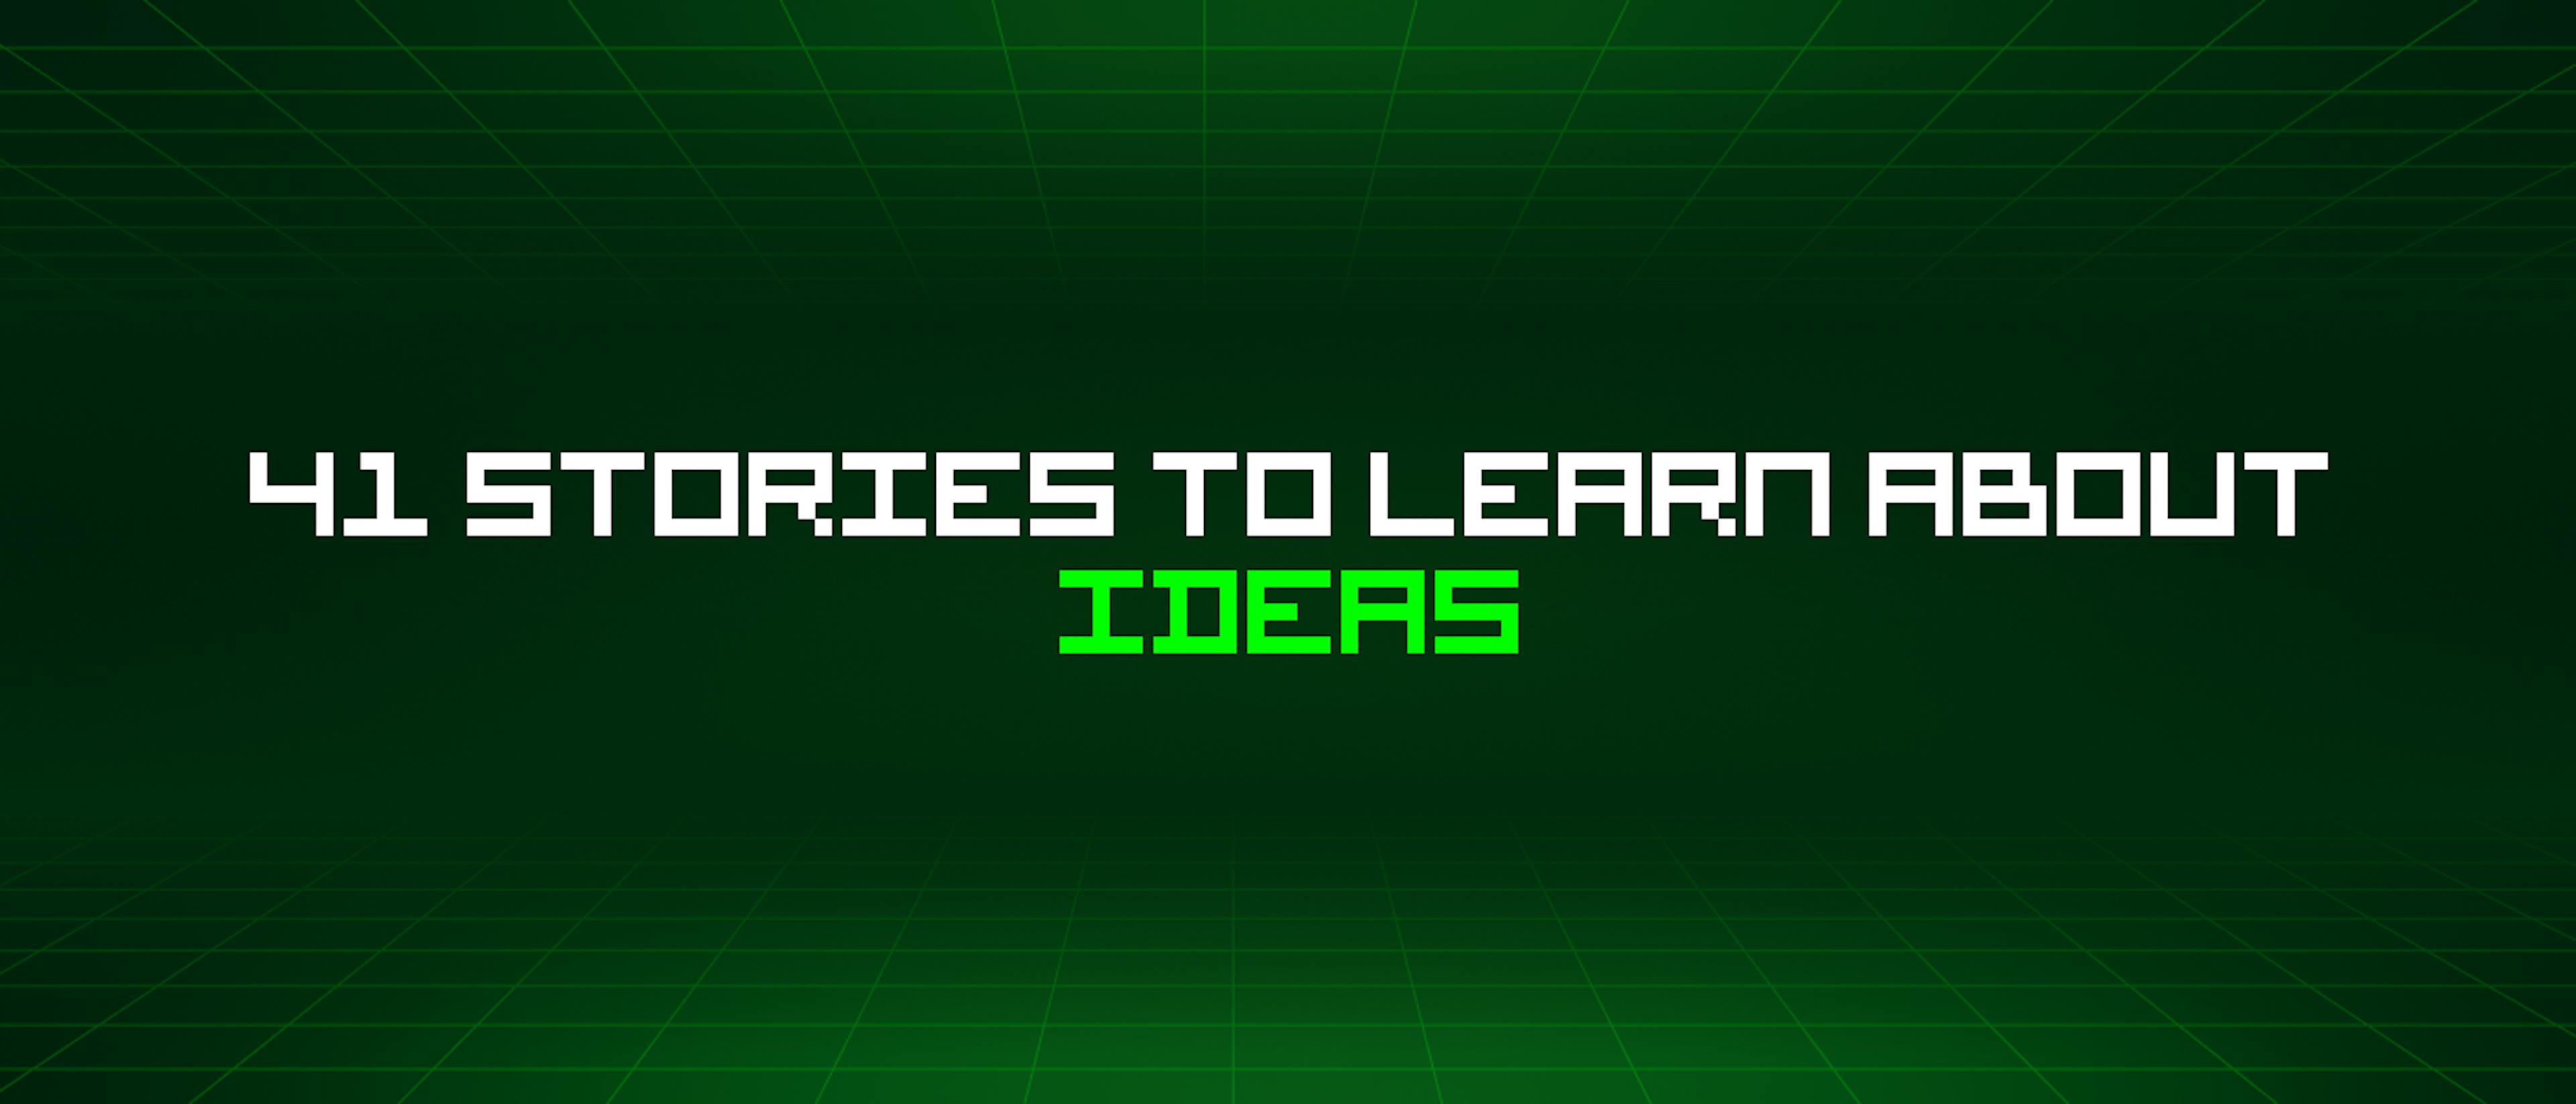 featured image - 41 Stories To Learn About Ideas